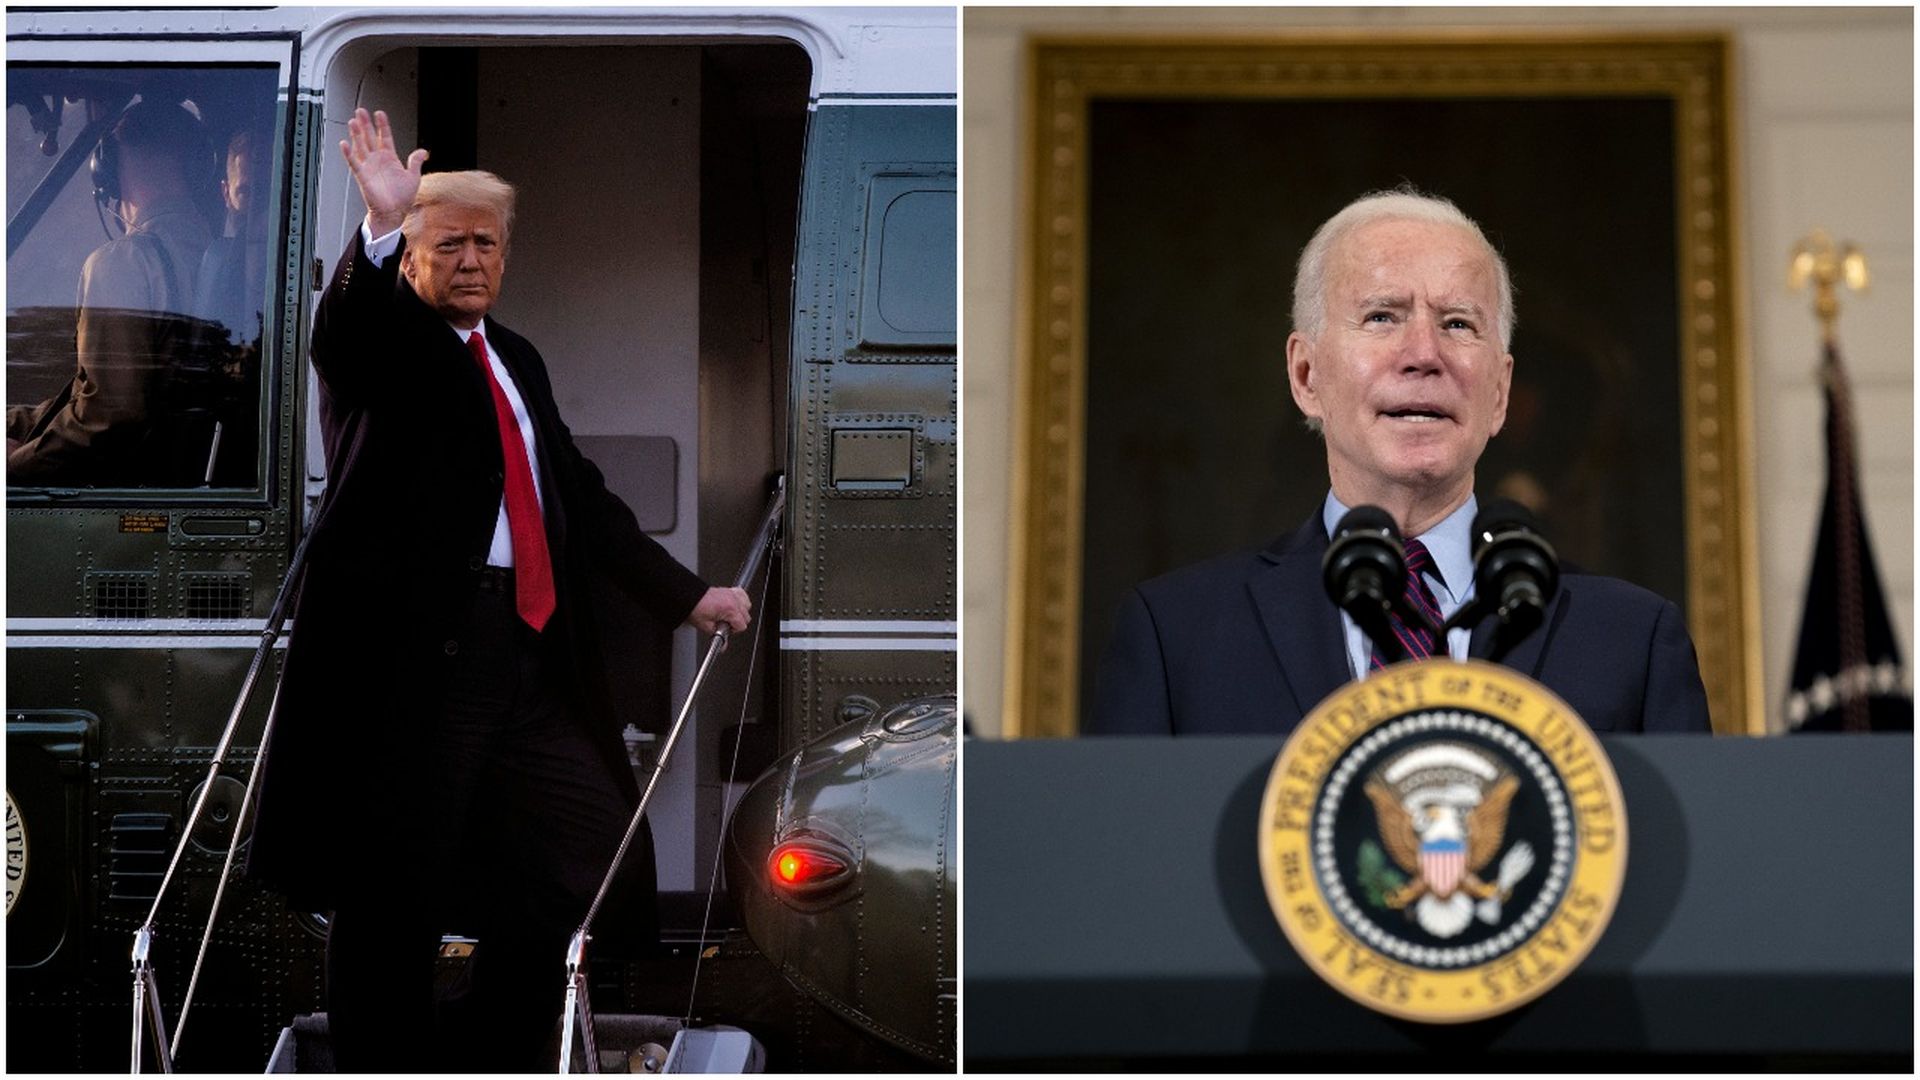 Photo of Donald Trump waving on the left and Joe Biden speaking behind a podium on the right